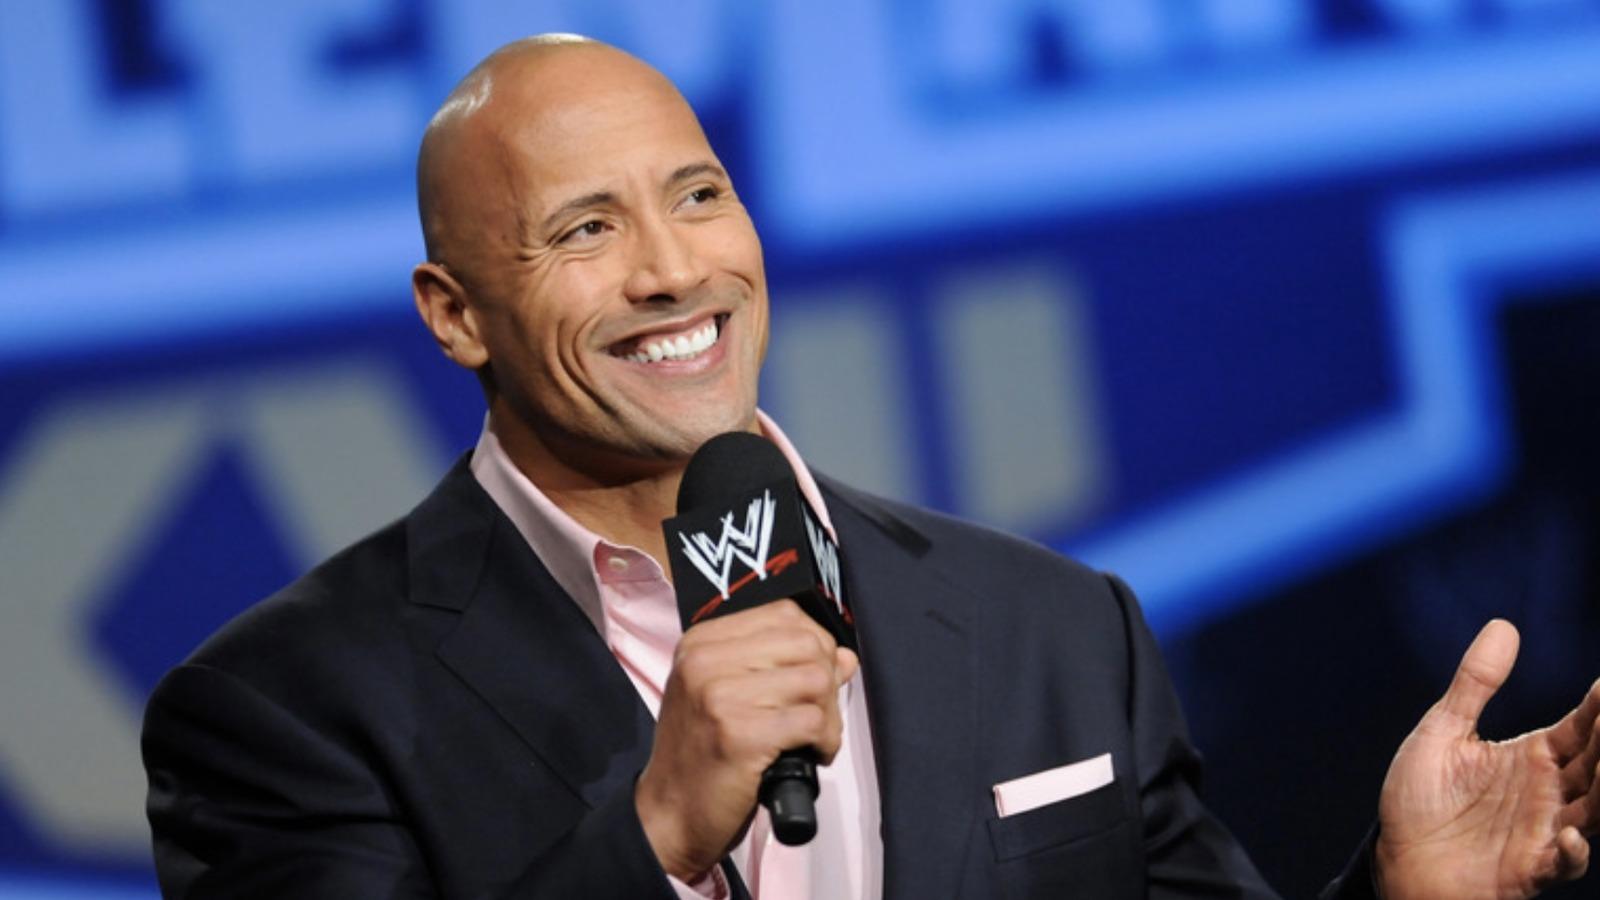 The Rock’s recent WWE return has the company at its highest peak since the Attitude Era